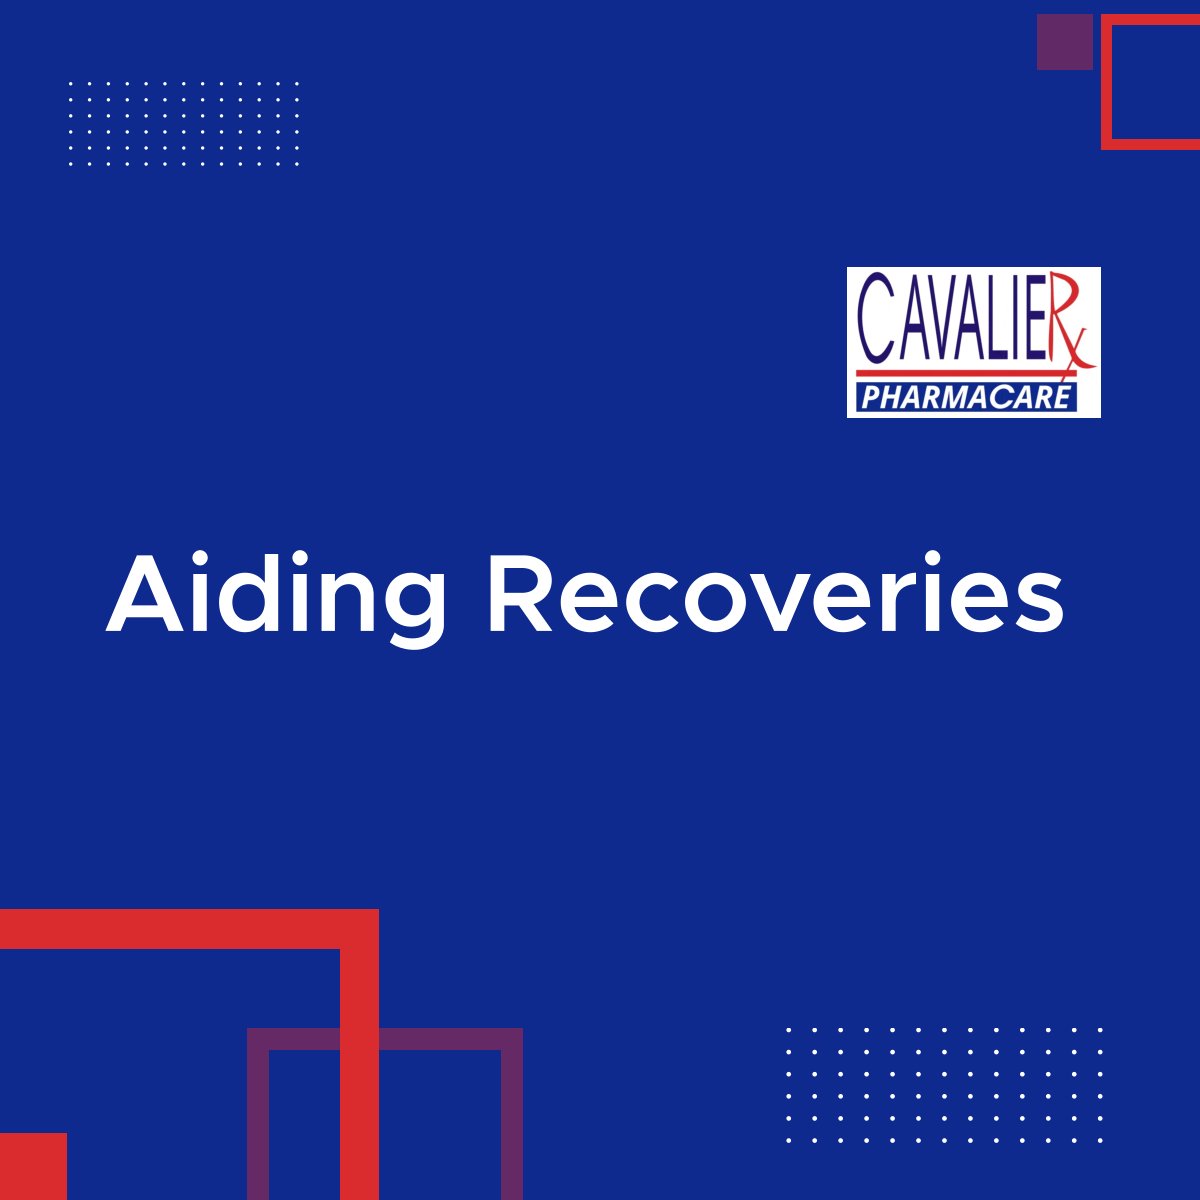 When patients take their medication properly, their chances of full recovery are much higher. We help them recover by providing our convenient and effective Medication On Time (MOT) packaging.

#MartinsvilleVA #PharmacyServices #AidingRecoveries #MedicationOnTime